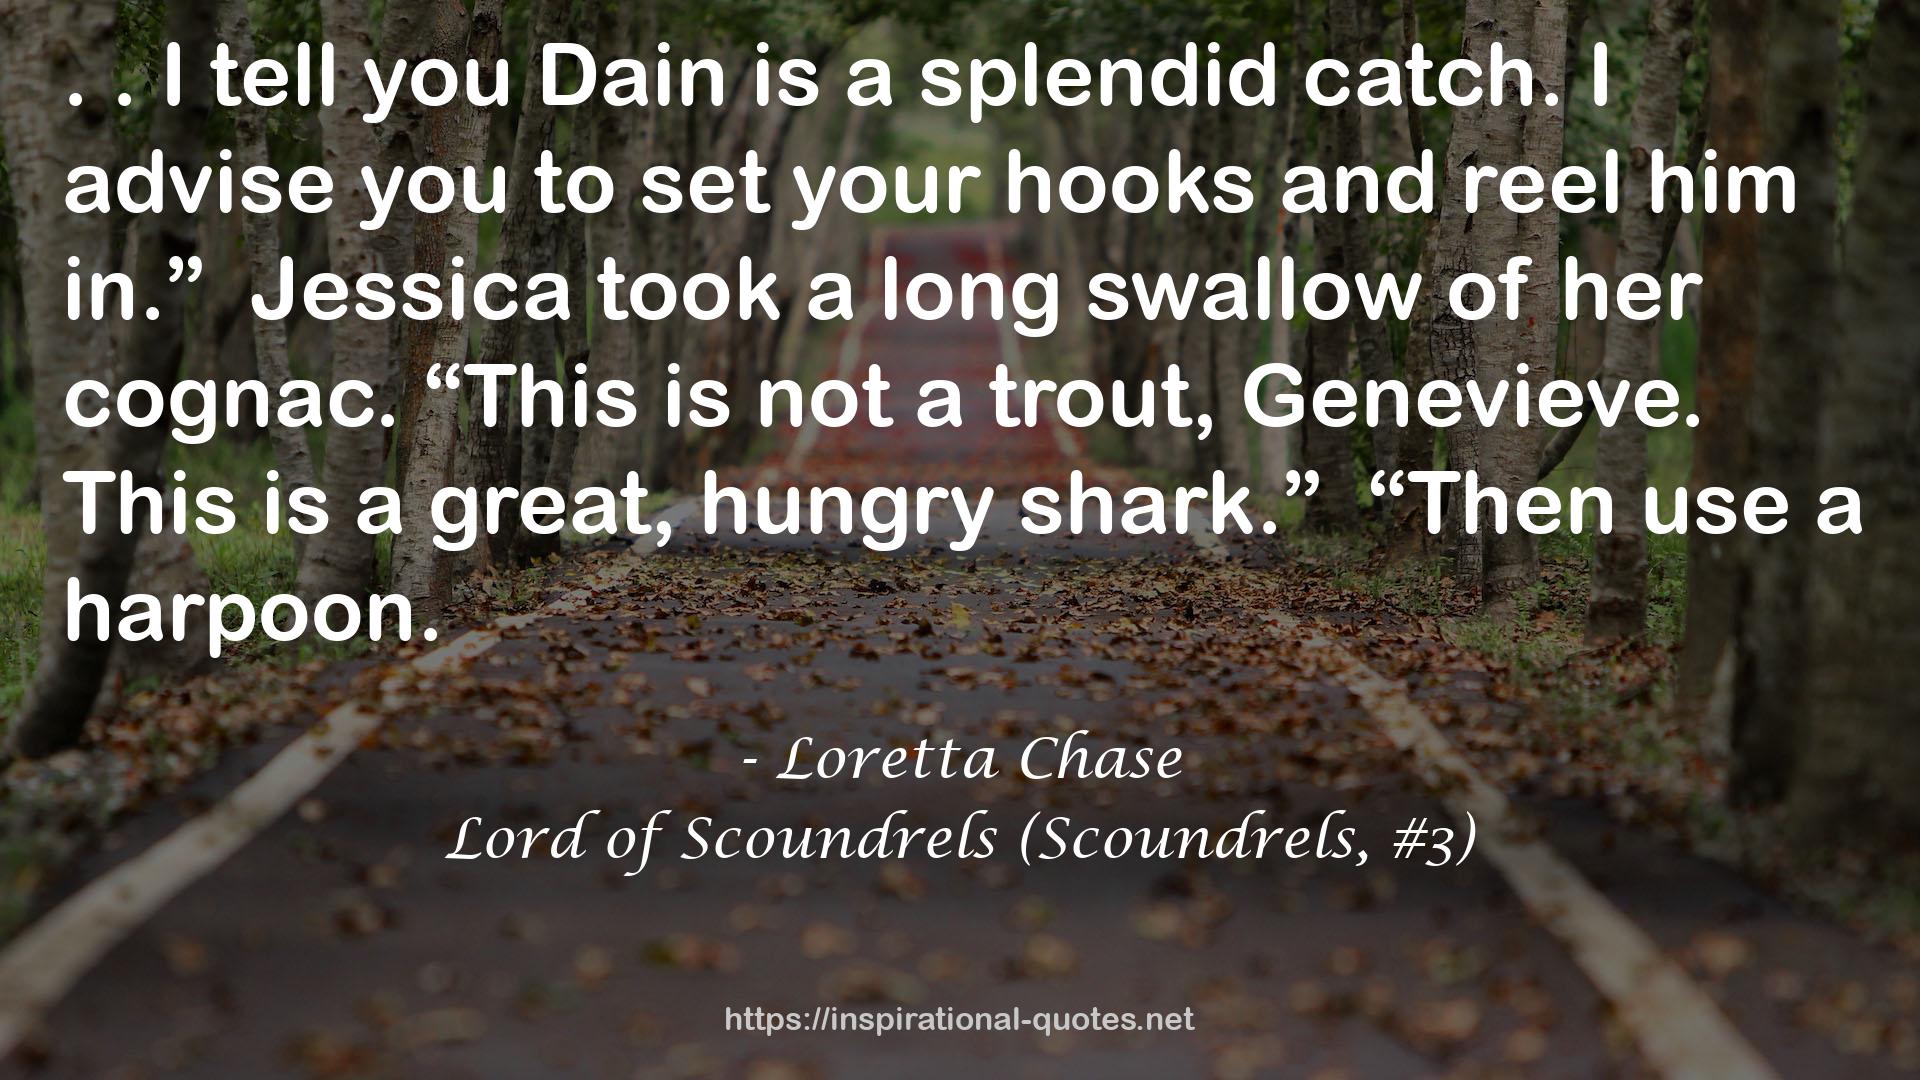 Lord of Scoundrels (Scoundrels, #3) QUOTES